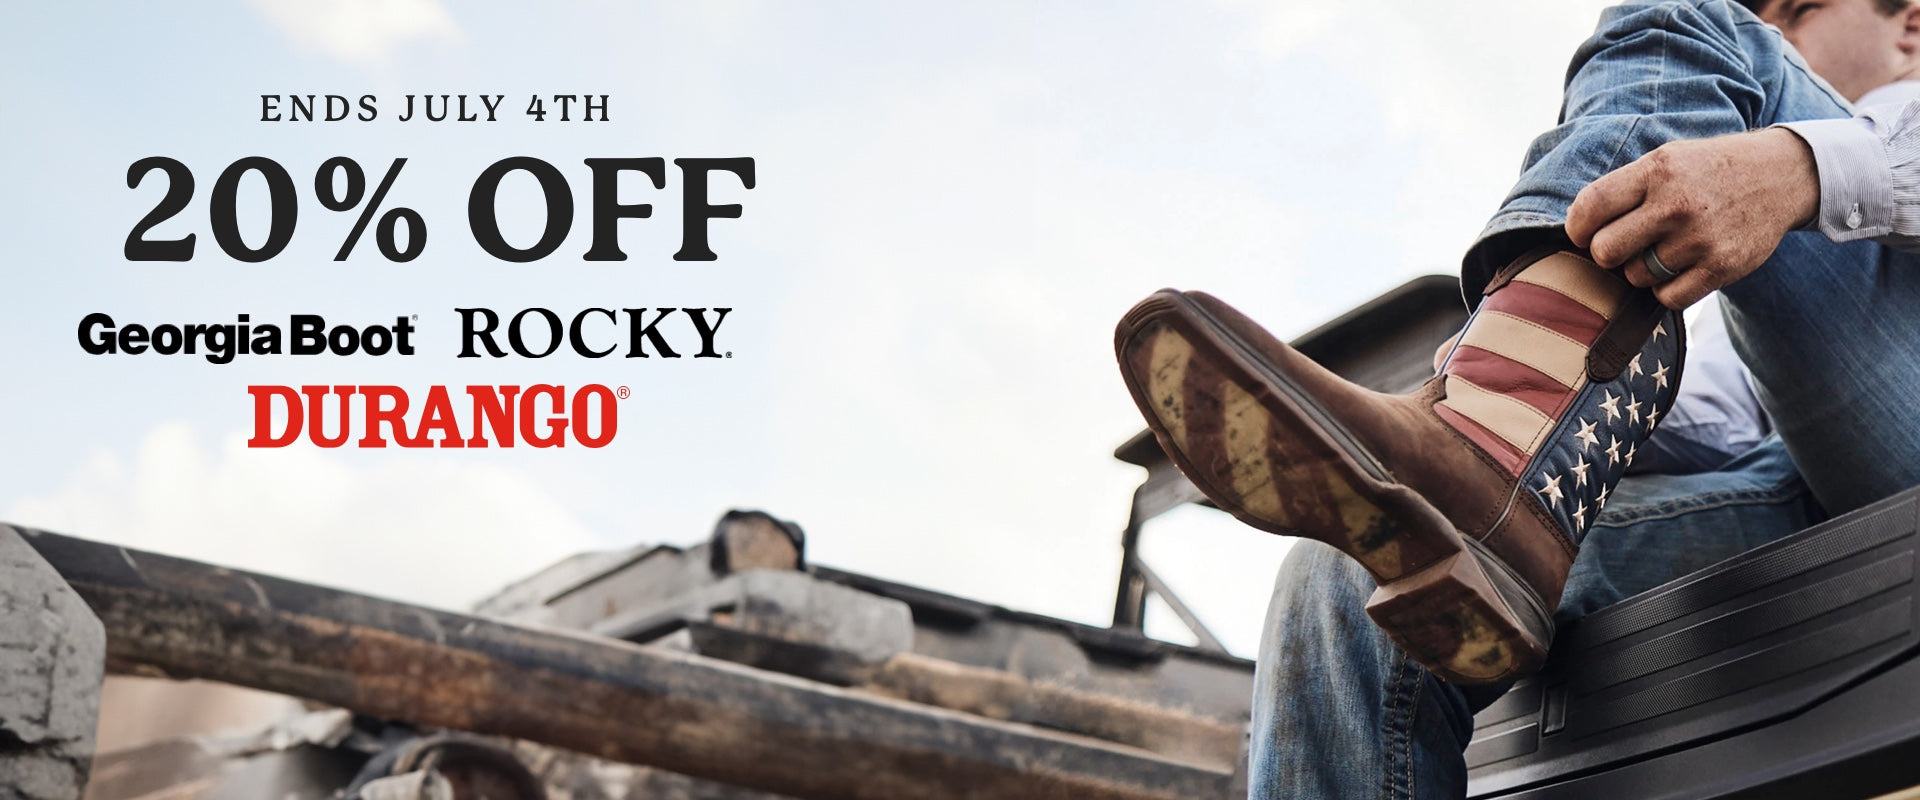 Rocky boots sale